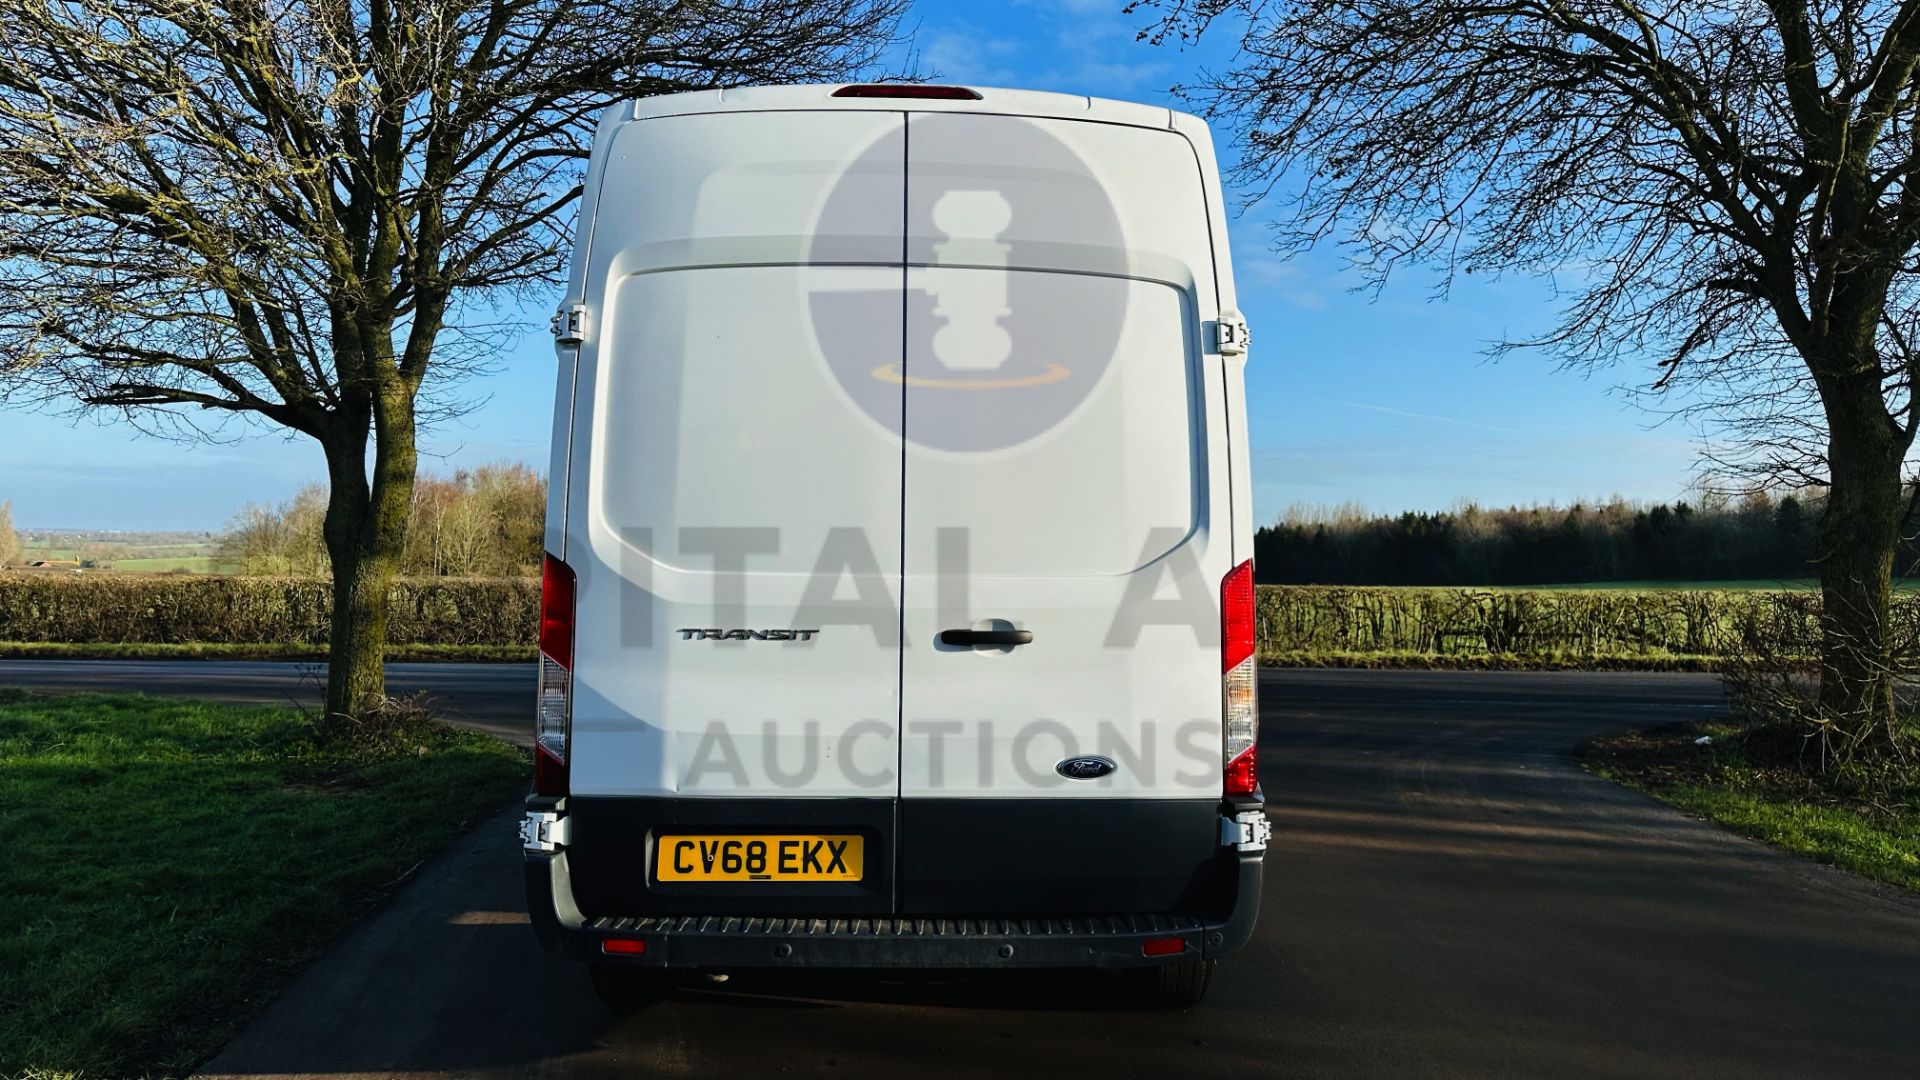 (On Sale) FORD TRANSIT 130 T350 *LWB -REFRIGERATED VAN* (2019 - EURO 6) 2.0 TDCI 'ECOBLUE' - 6 SPEED - Image 11 of 43